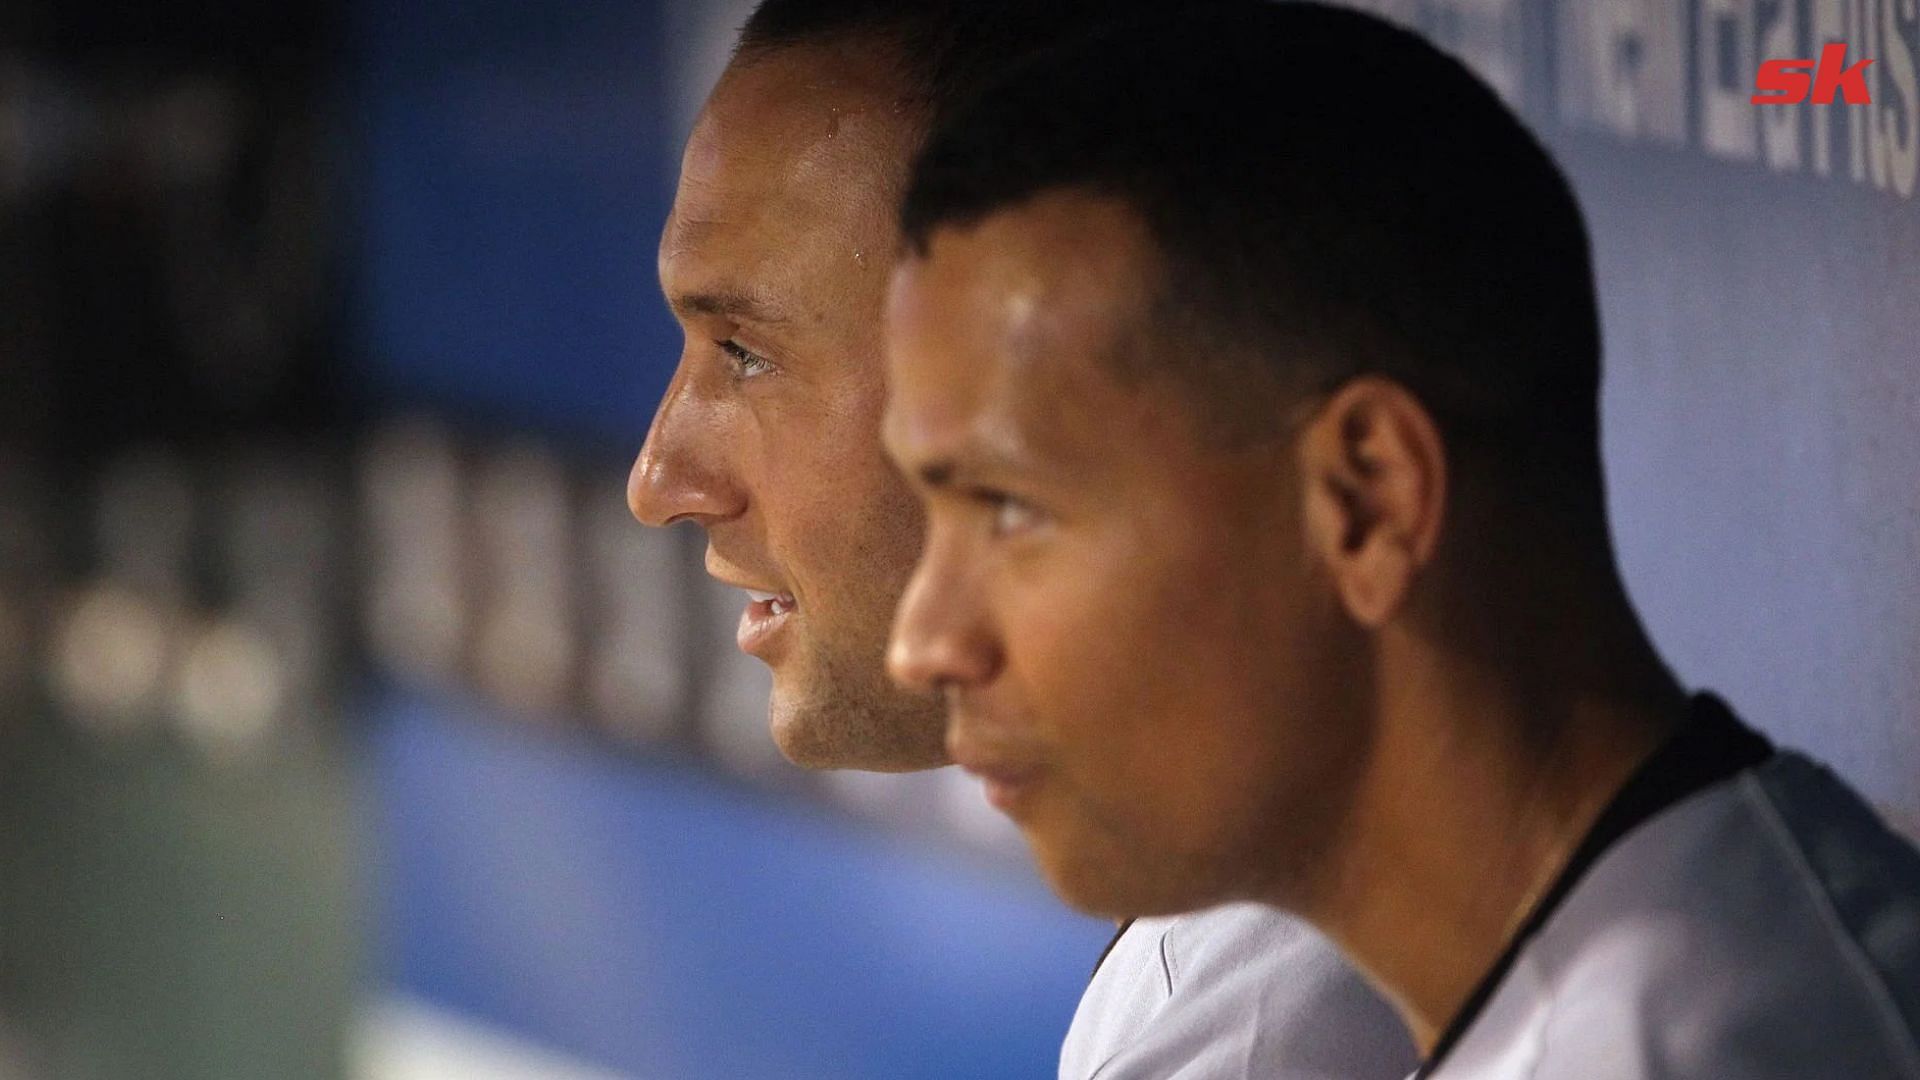 Fans humorously claim Derek Jeter and Alex Rodriguez responsible for Miami  Heat's defeat - The moment where this series flipped